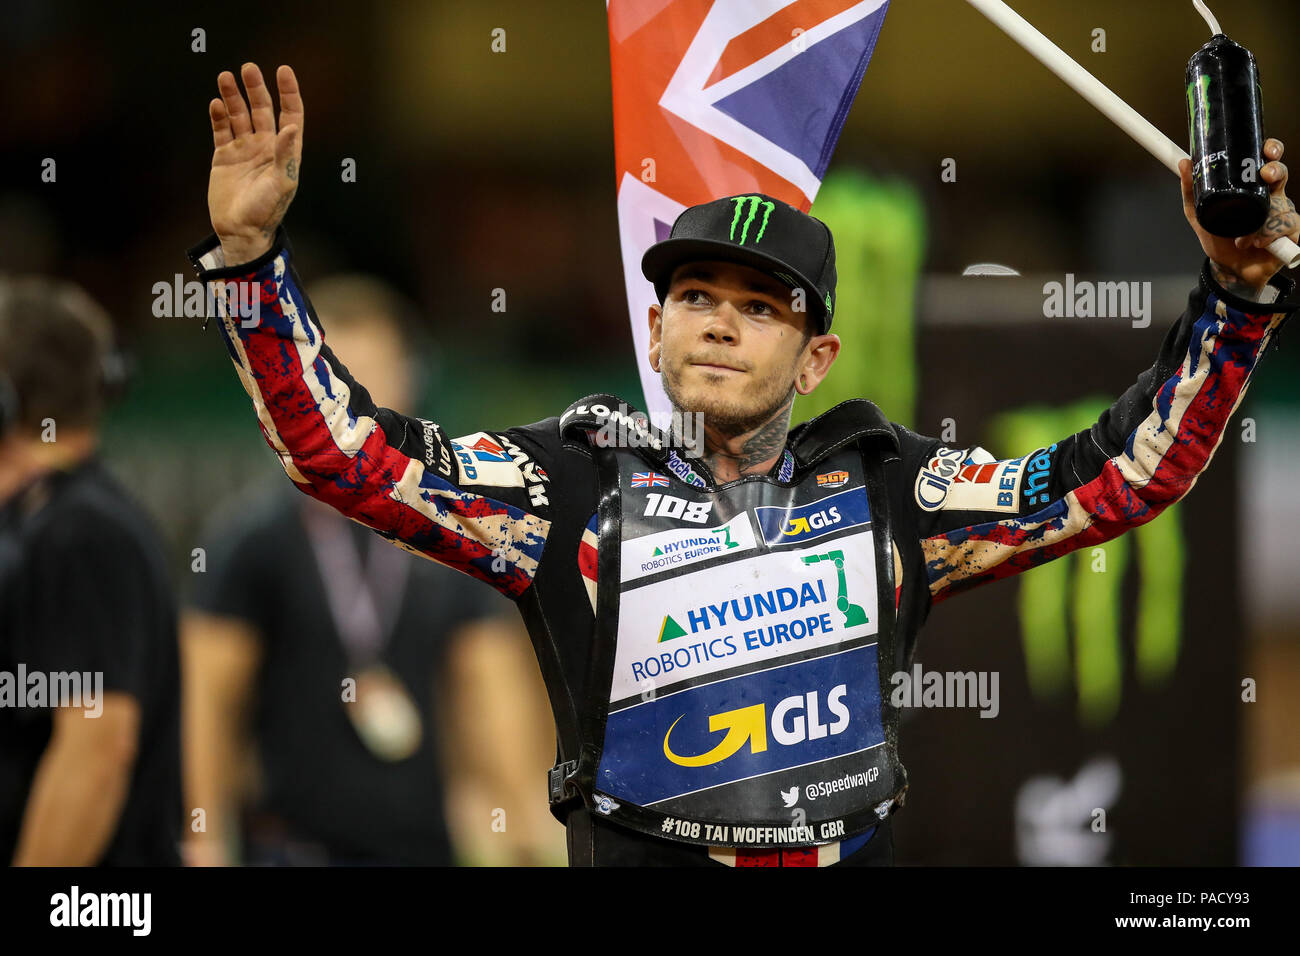 Principality Stadium. Cardiff, UK. 21st July, 2018. Adrian Flux British FIM Speedway Grand Prix; Tai Woffinden applauds the crowd as he takes 2nd place in the GP Credit: Action Plus Sports/Alamy Live News Stock Photo